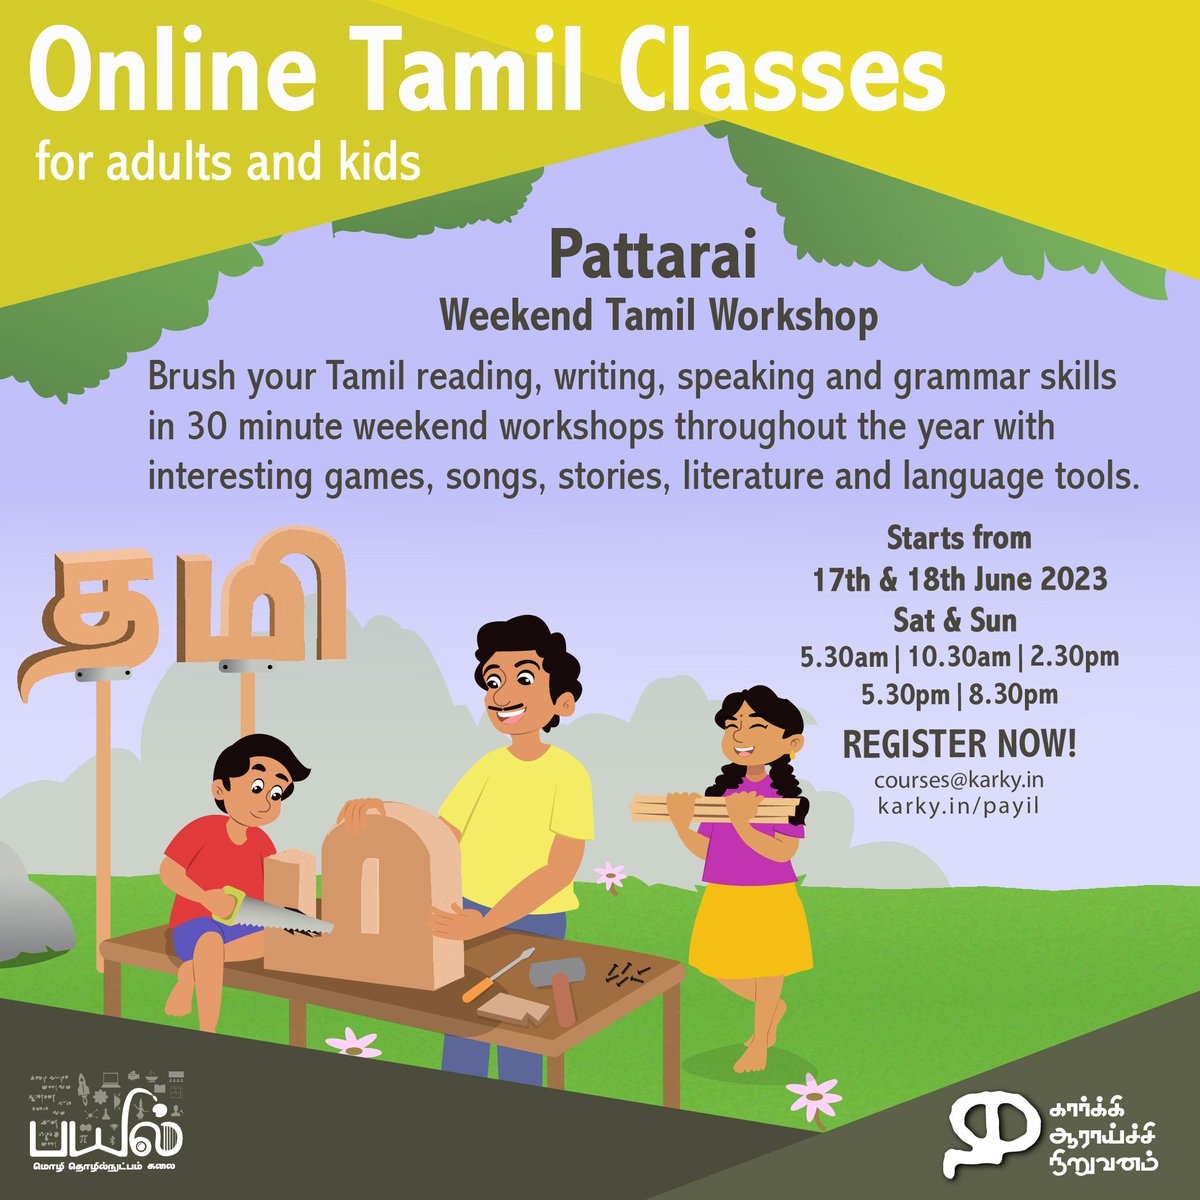 Ready to embrace the elegance of #Tamil? 

#Pattarai has got you covered! 

Our flexible weekend sessions cater to busy professionals, allowing you to learn at your own pace. 

Enroll now!
karky.in/payil